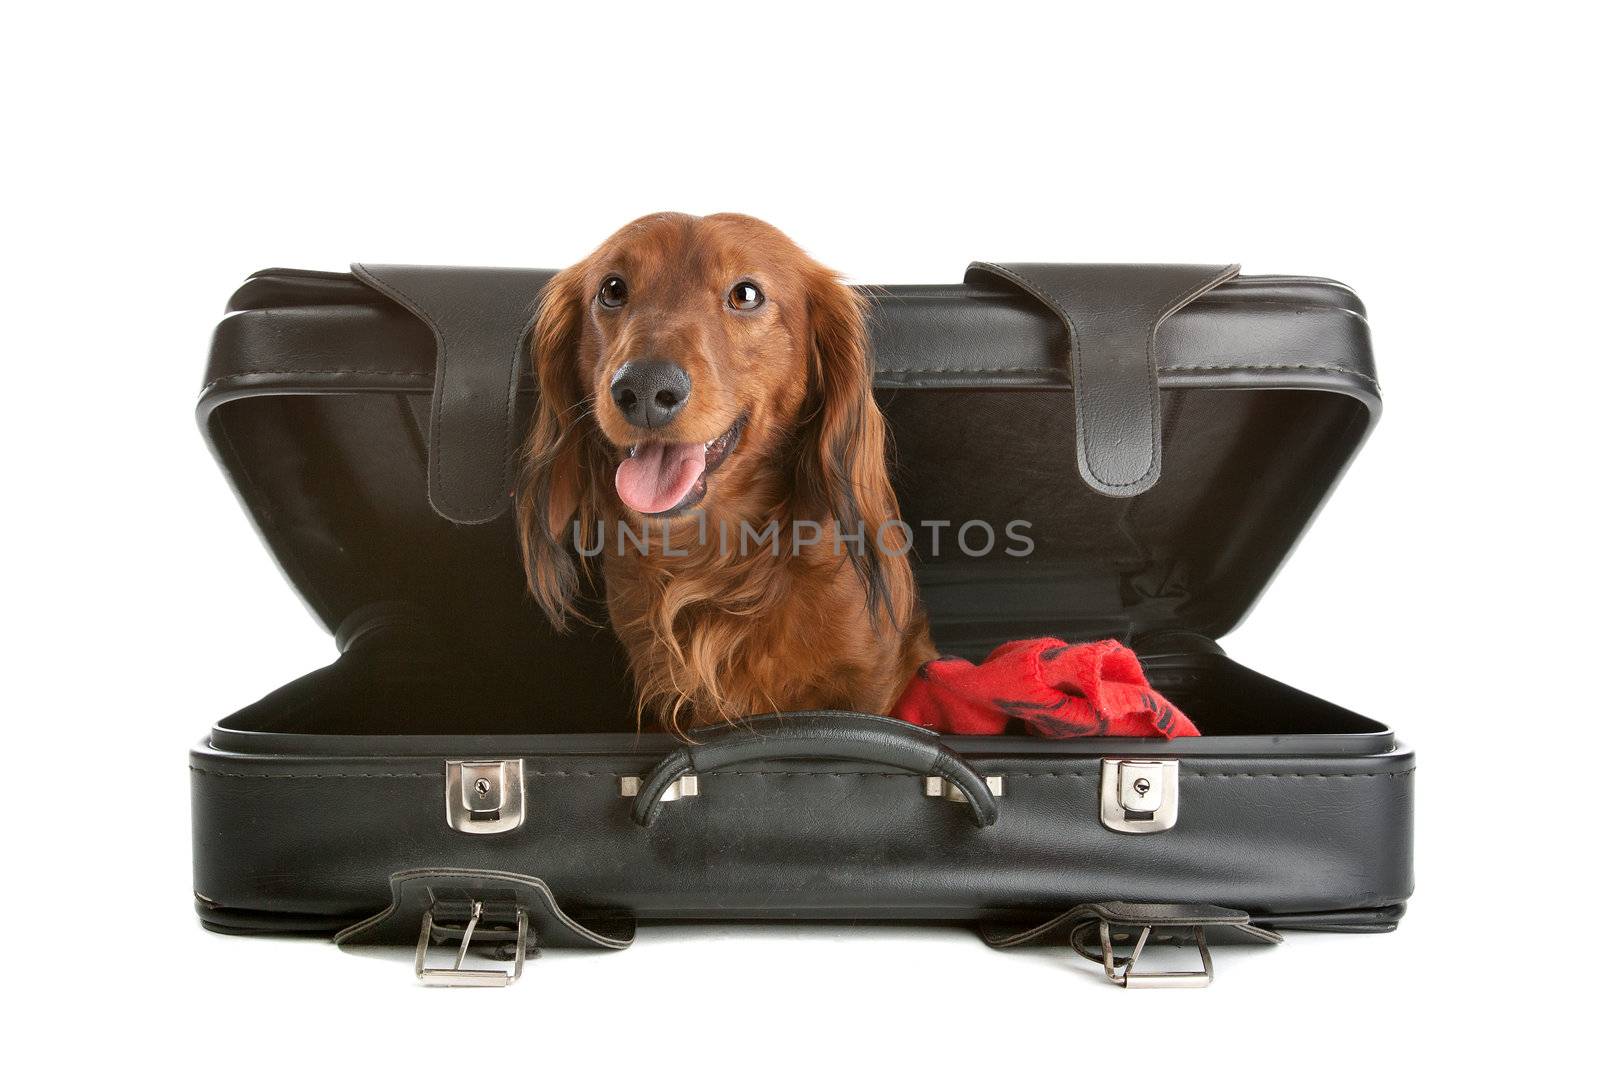 A delightful view of a small, naughty Dachshund dog playfully peering out from inside a black suitcase.